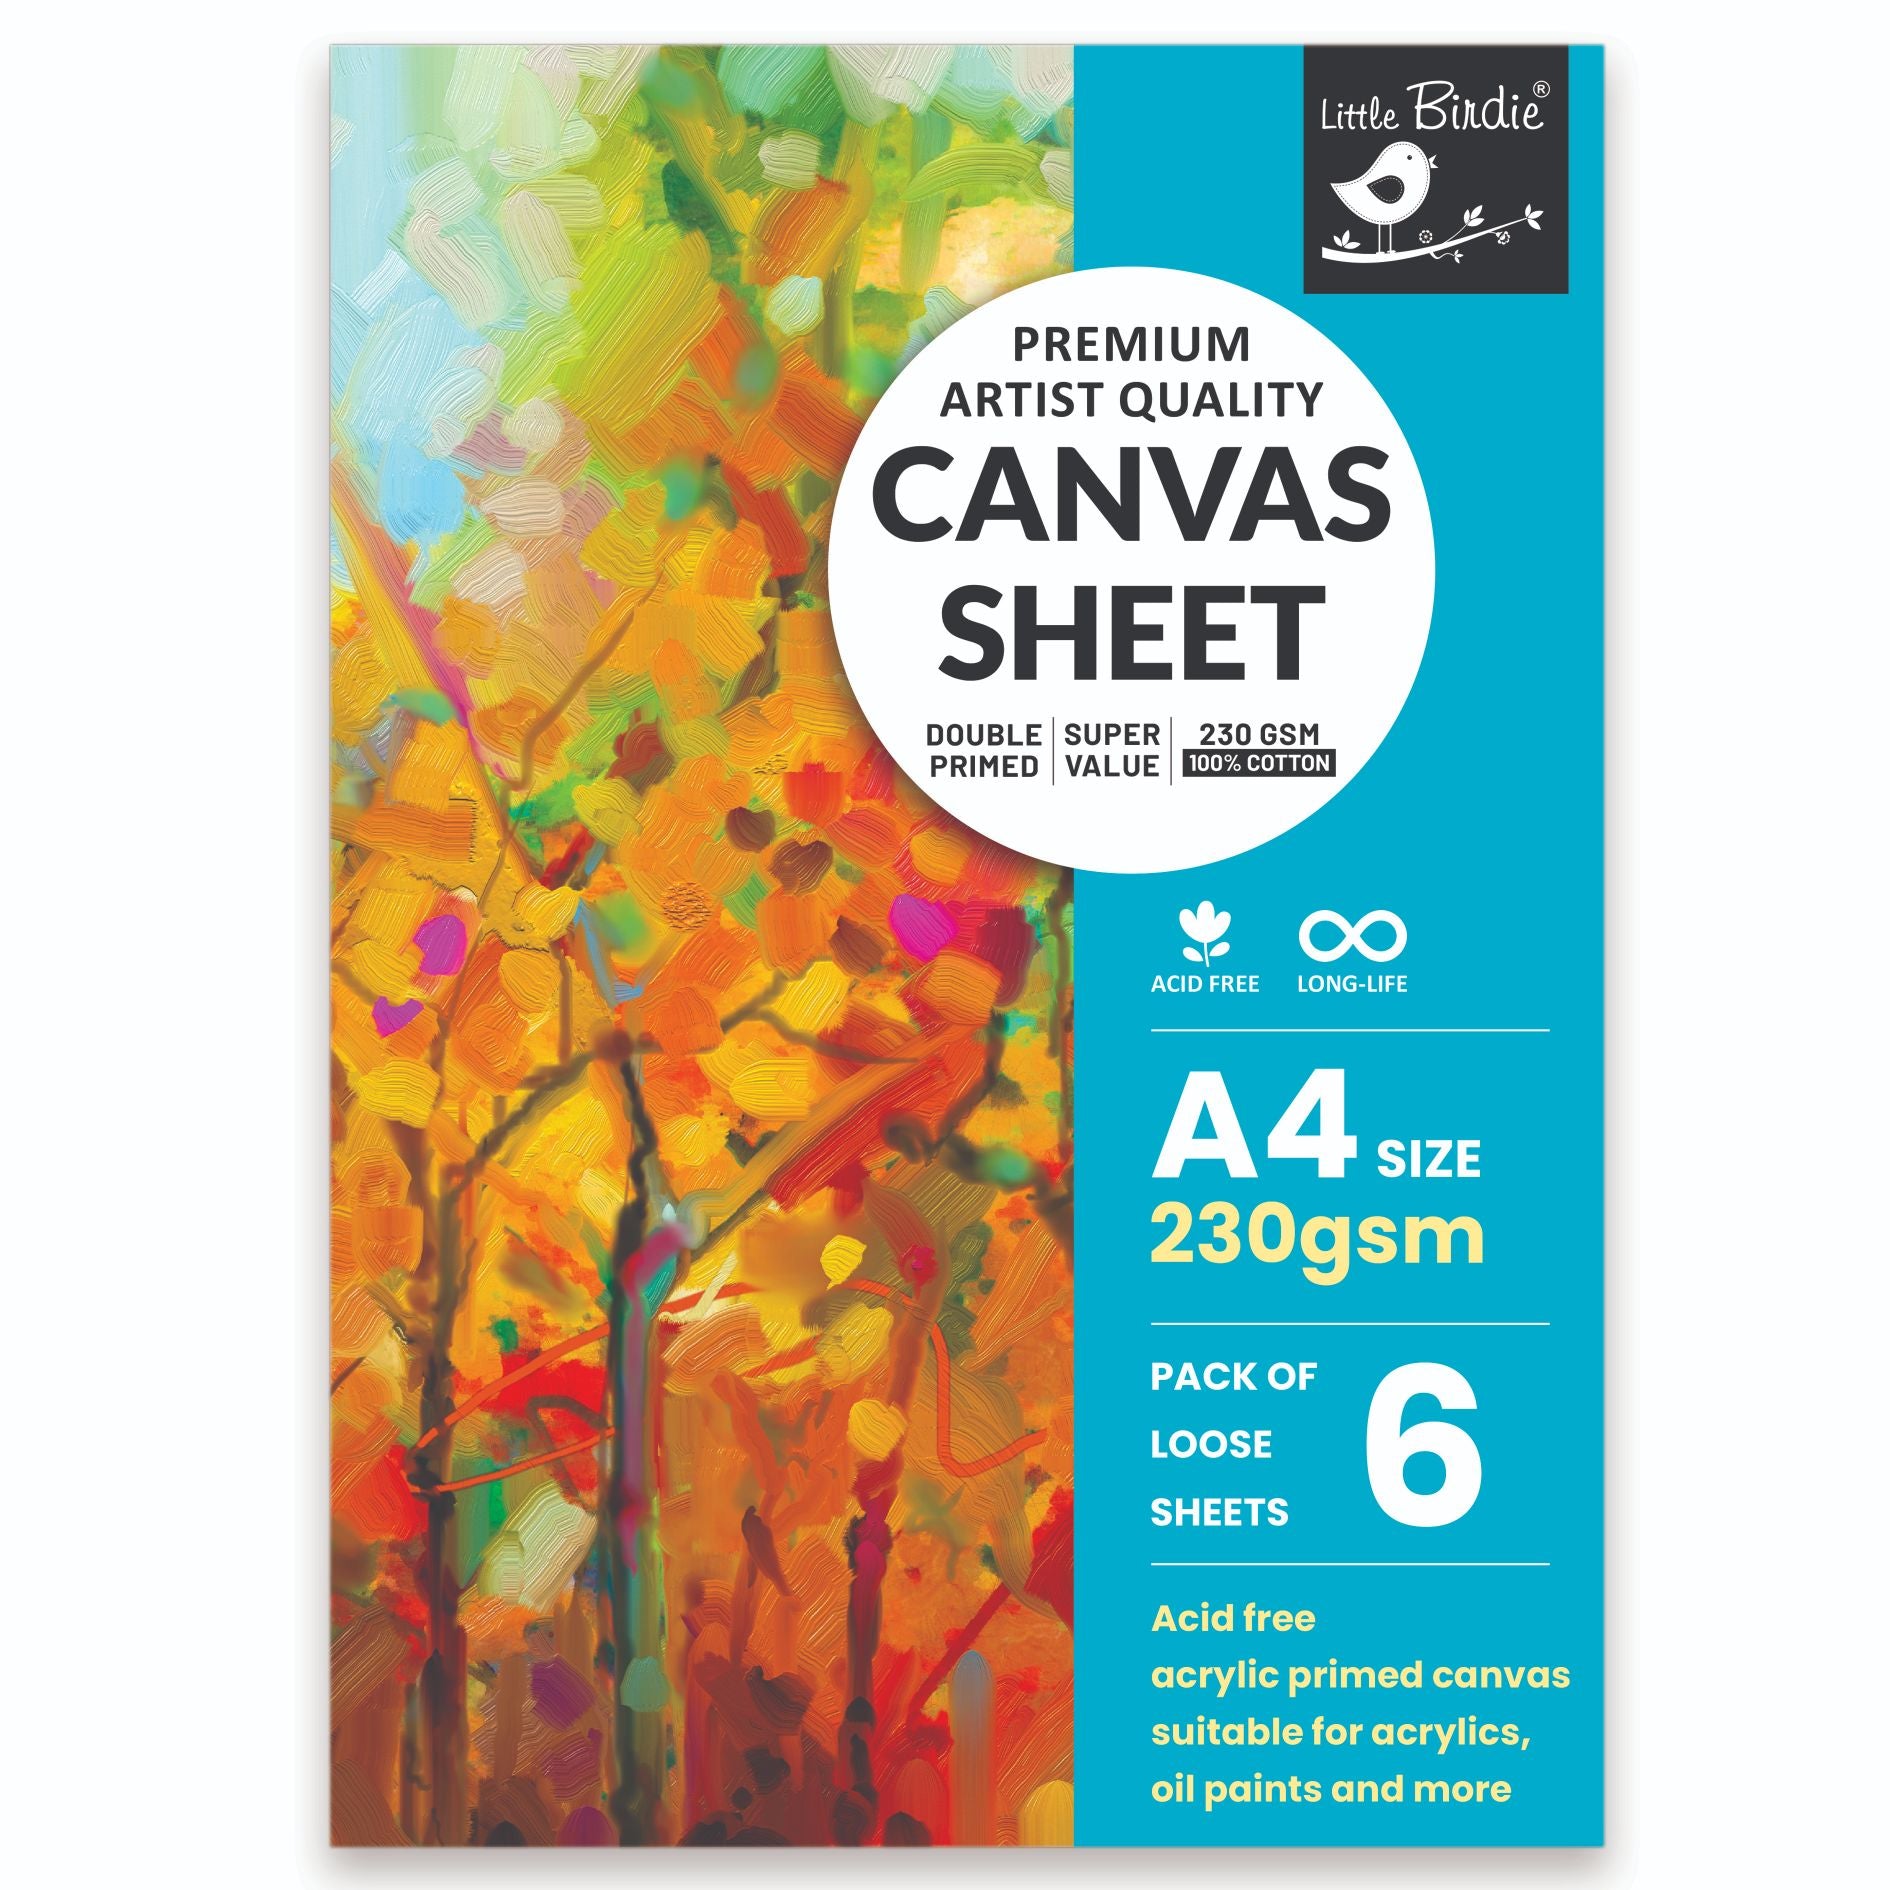 Premium Artist Canvas Sheets A4 Size 230 Gsm Pack Of 6 Sheets